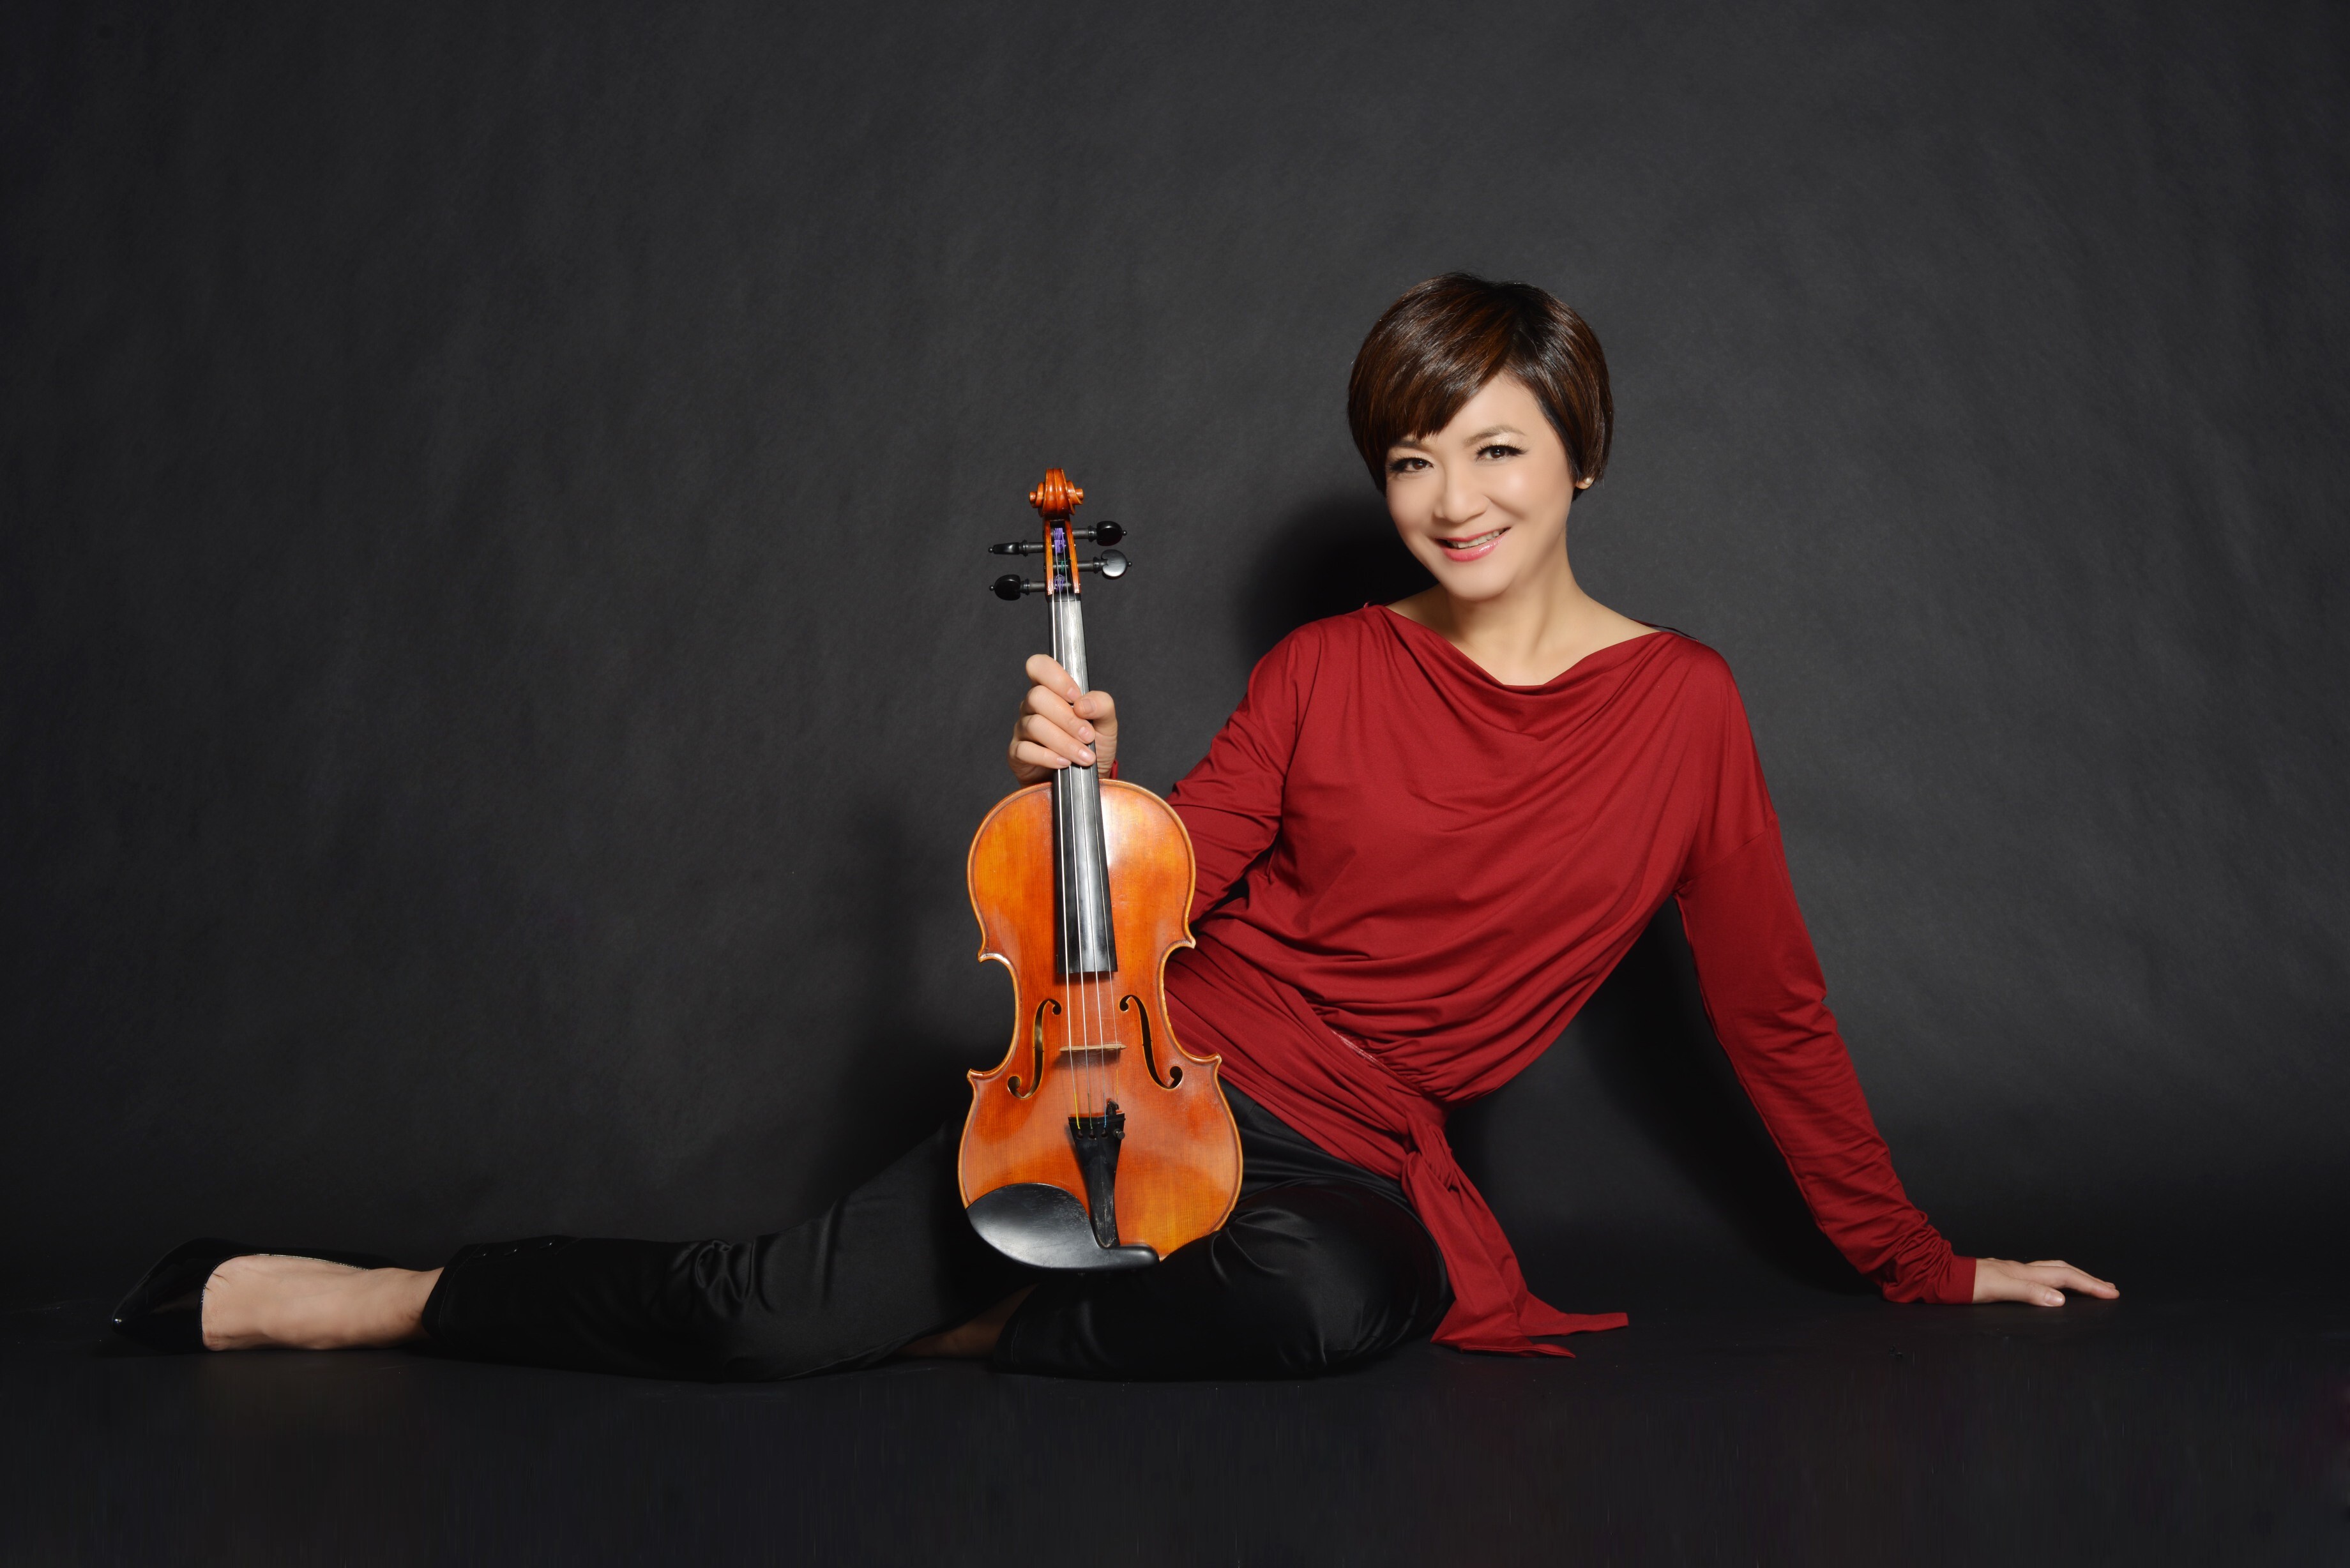 Yao Jue, violinist and founder of the Hong Kong String Orchestra which will give a concert of Chinese and Western music to celebrate the Chinese Communist Party’s centenary and the city’s rich diversity. Photo: Courtesy of Hong Kong String Orchestra